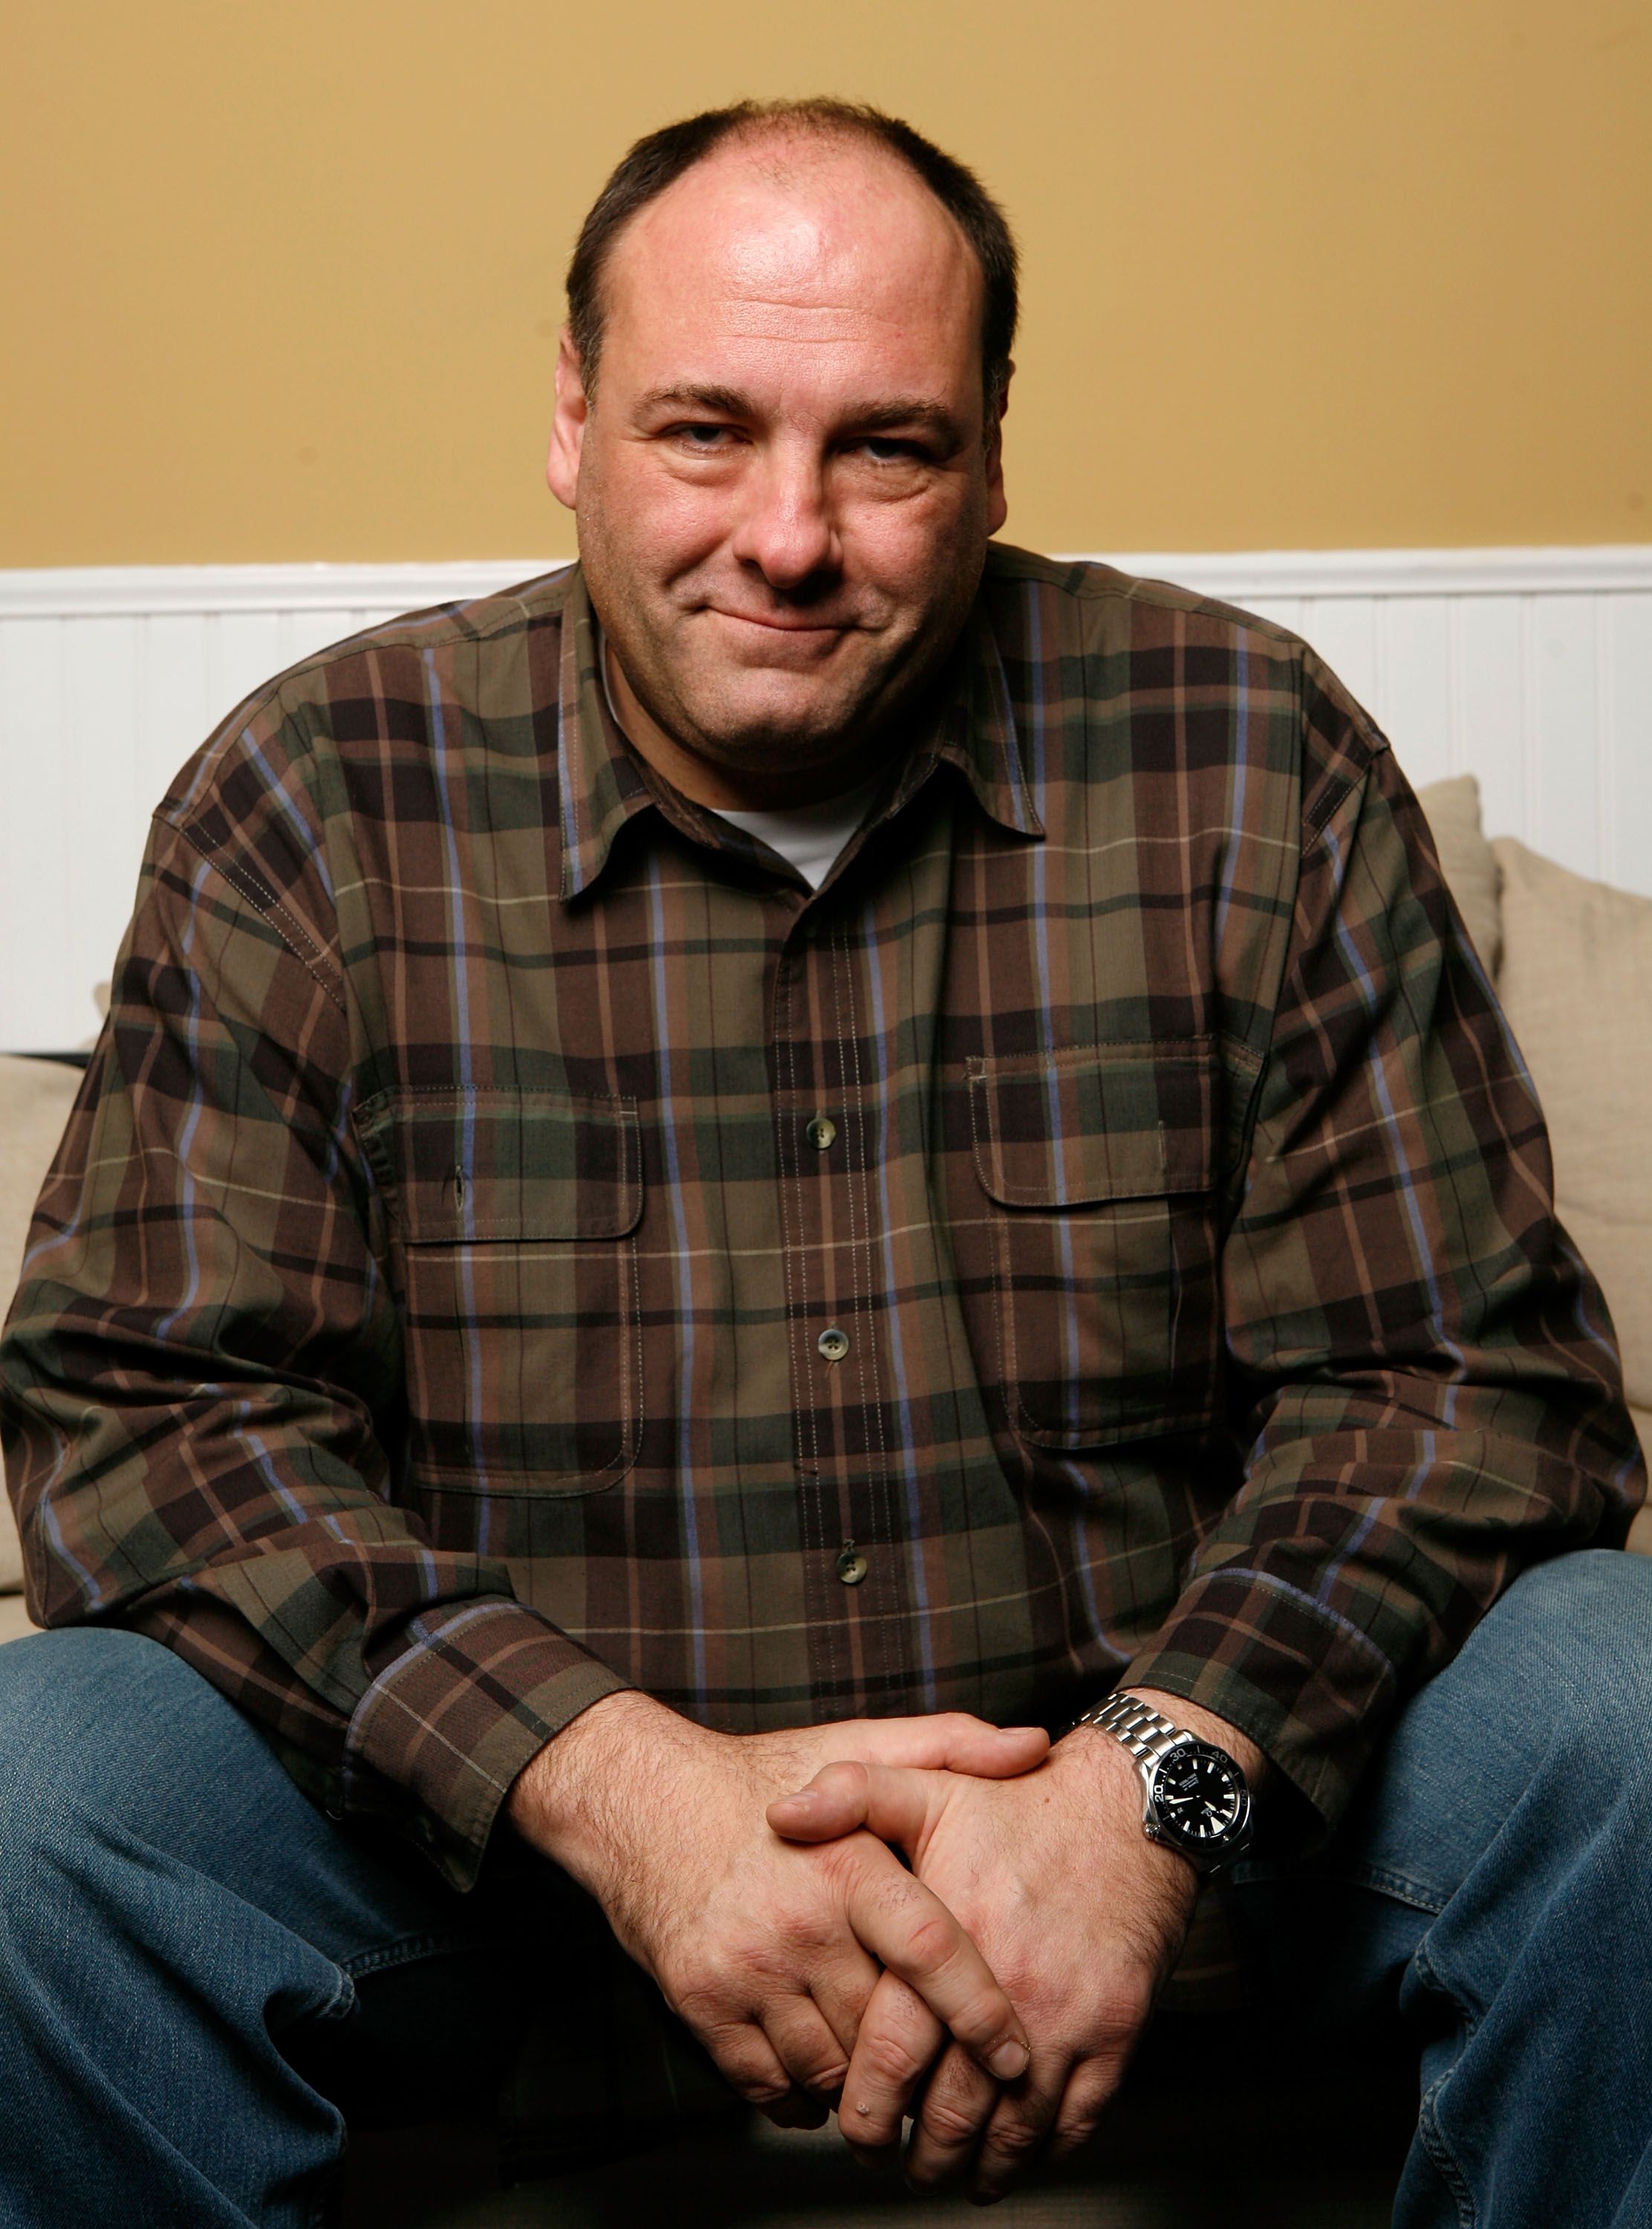 PARK CITY, UT - JANUARY 22:  Actor James Gandolfini of the film "In The Loop" poses for a portrait at The Lift during the 2009 Sundance Film Festival on January 22, 2009 in Park City, Utah.  (Photo by Matt Carr/Getty Images)